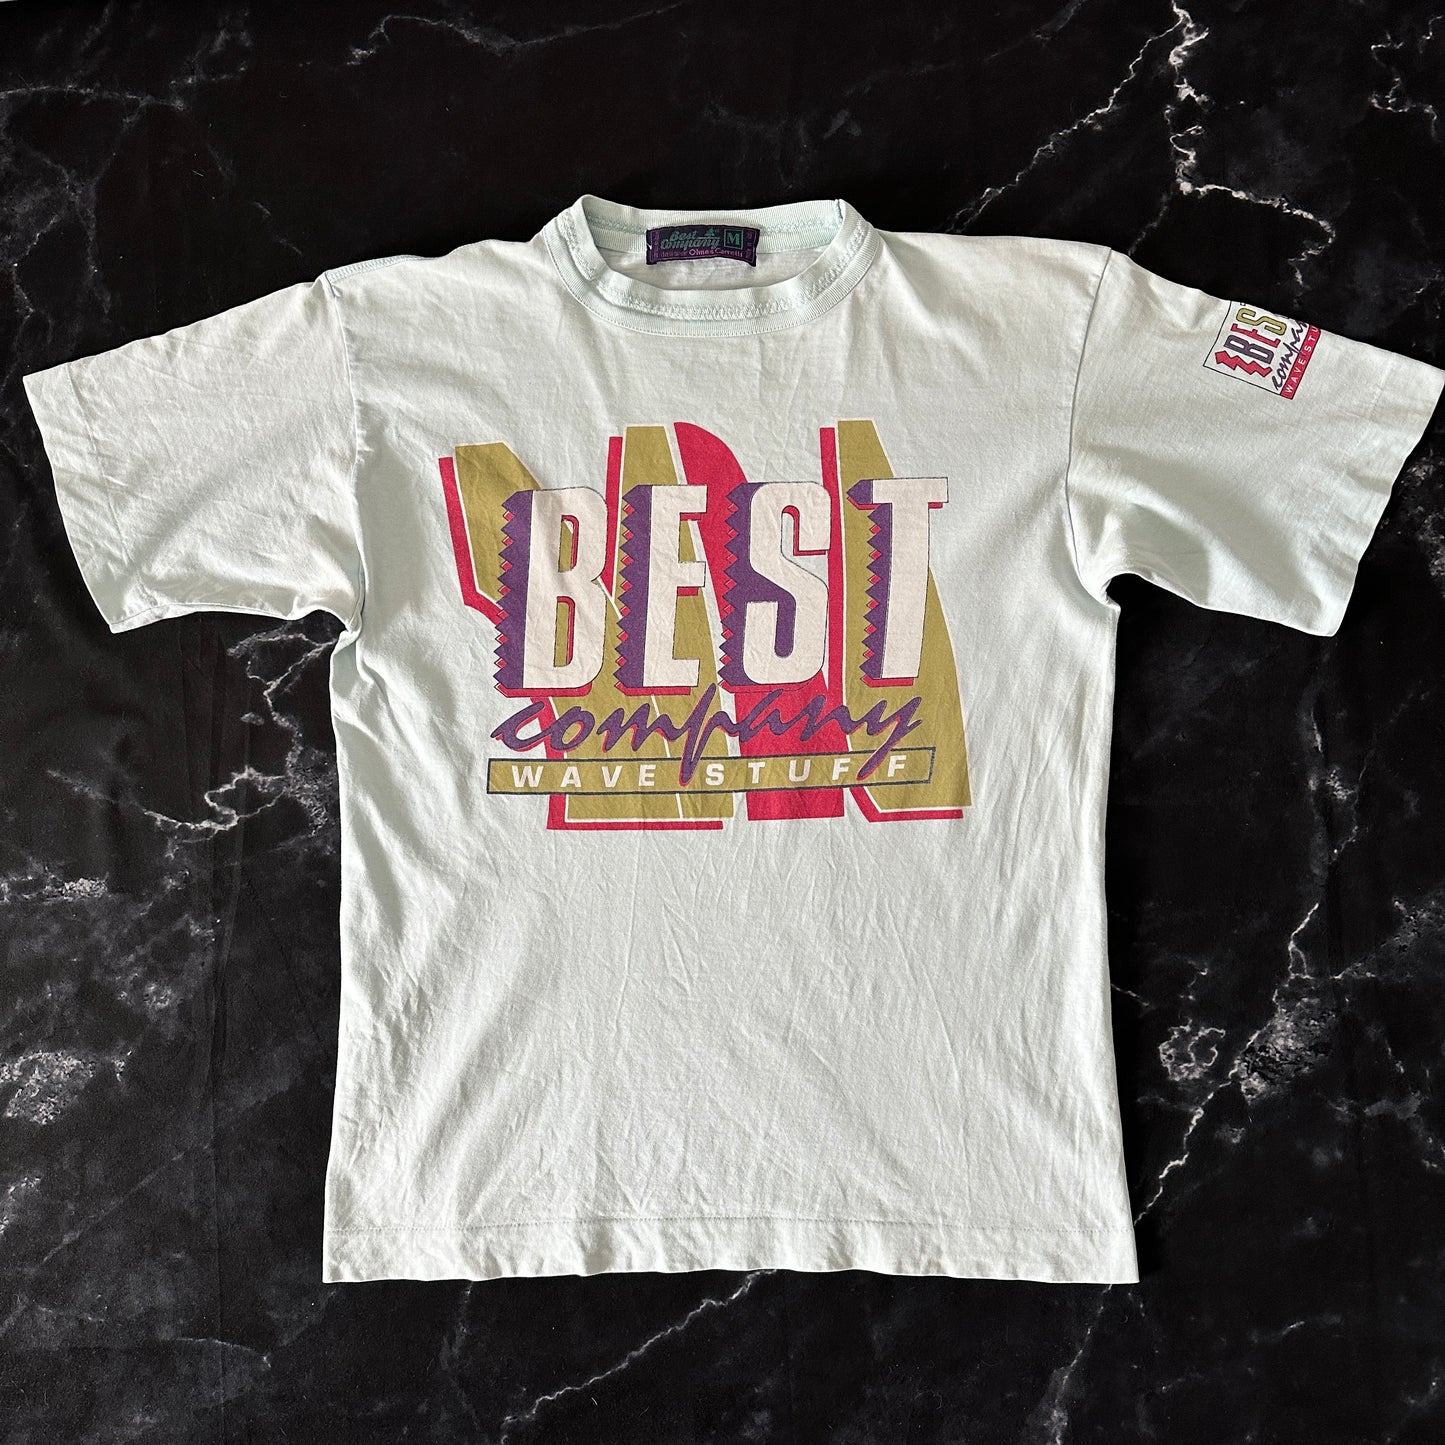 Best Company 80s Vintage T-Shirt - M - Made in Italy